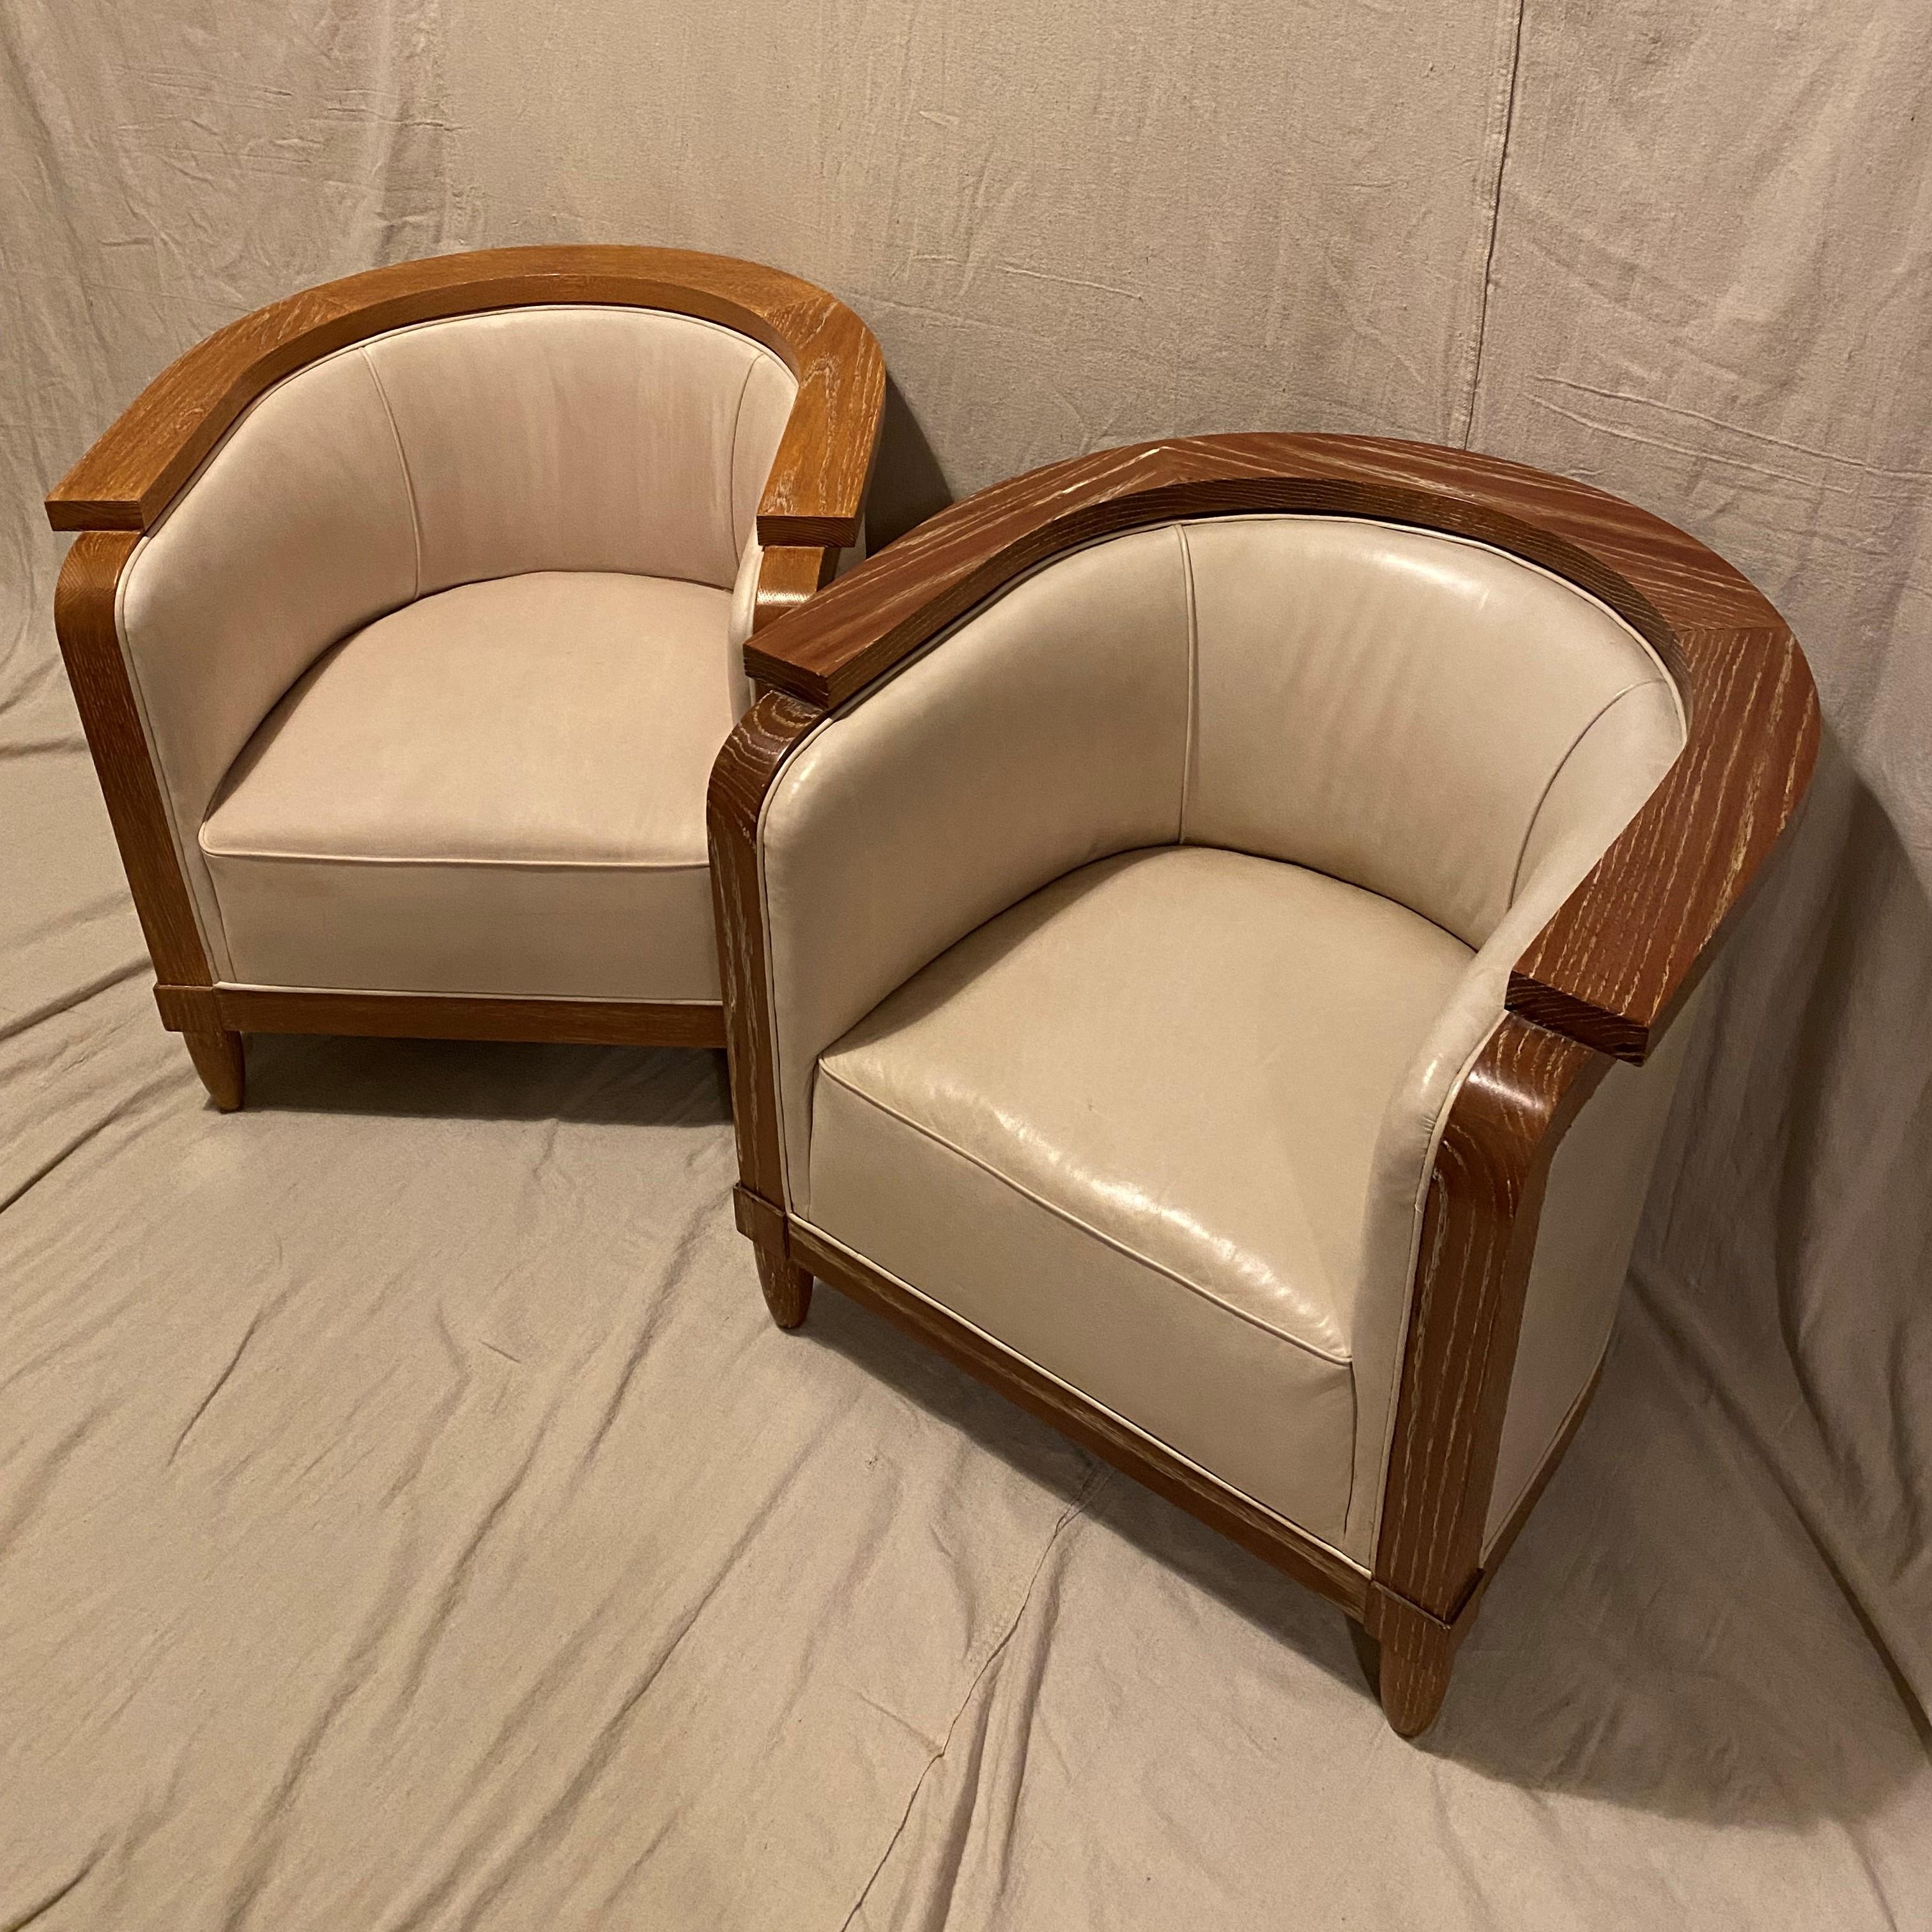 Cerused Jacque Adnet Small Scale Lounge Chairs